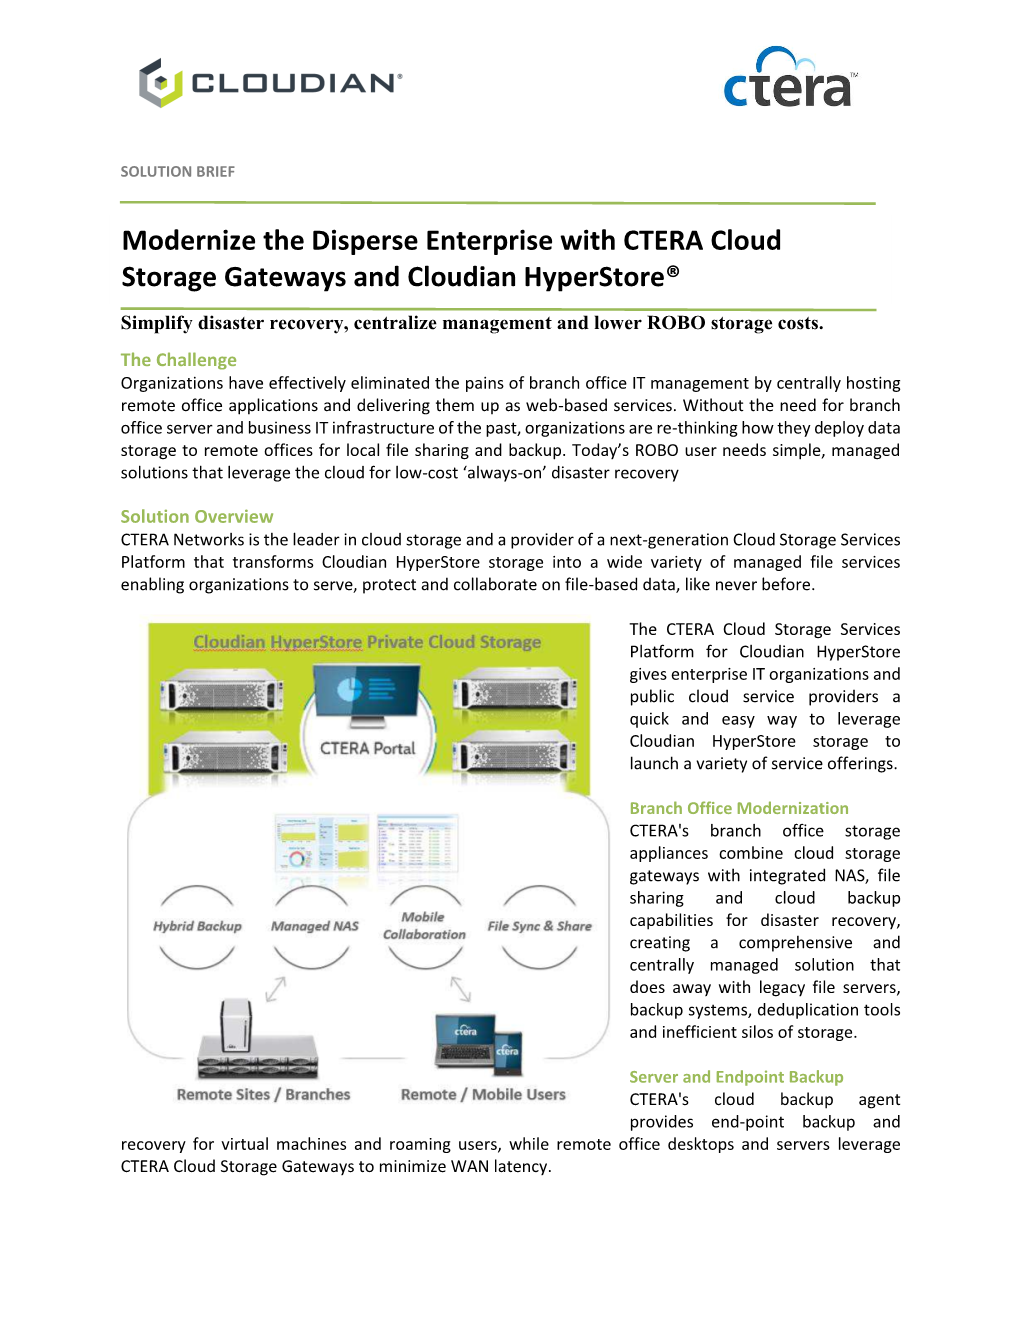 Modernize the Disperse Enterprise with CTERA Cloud Storage Gateways and Cloudian Hyperstore®